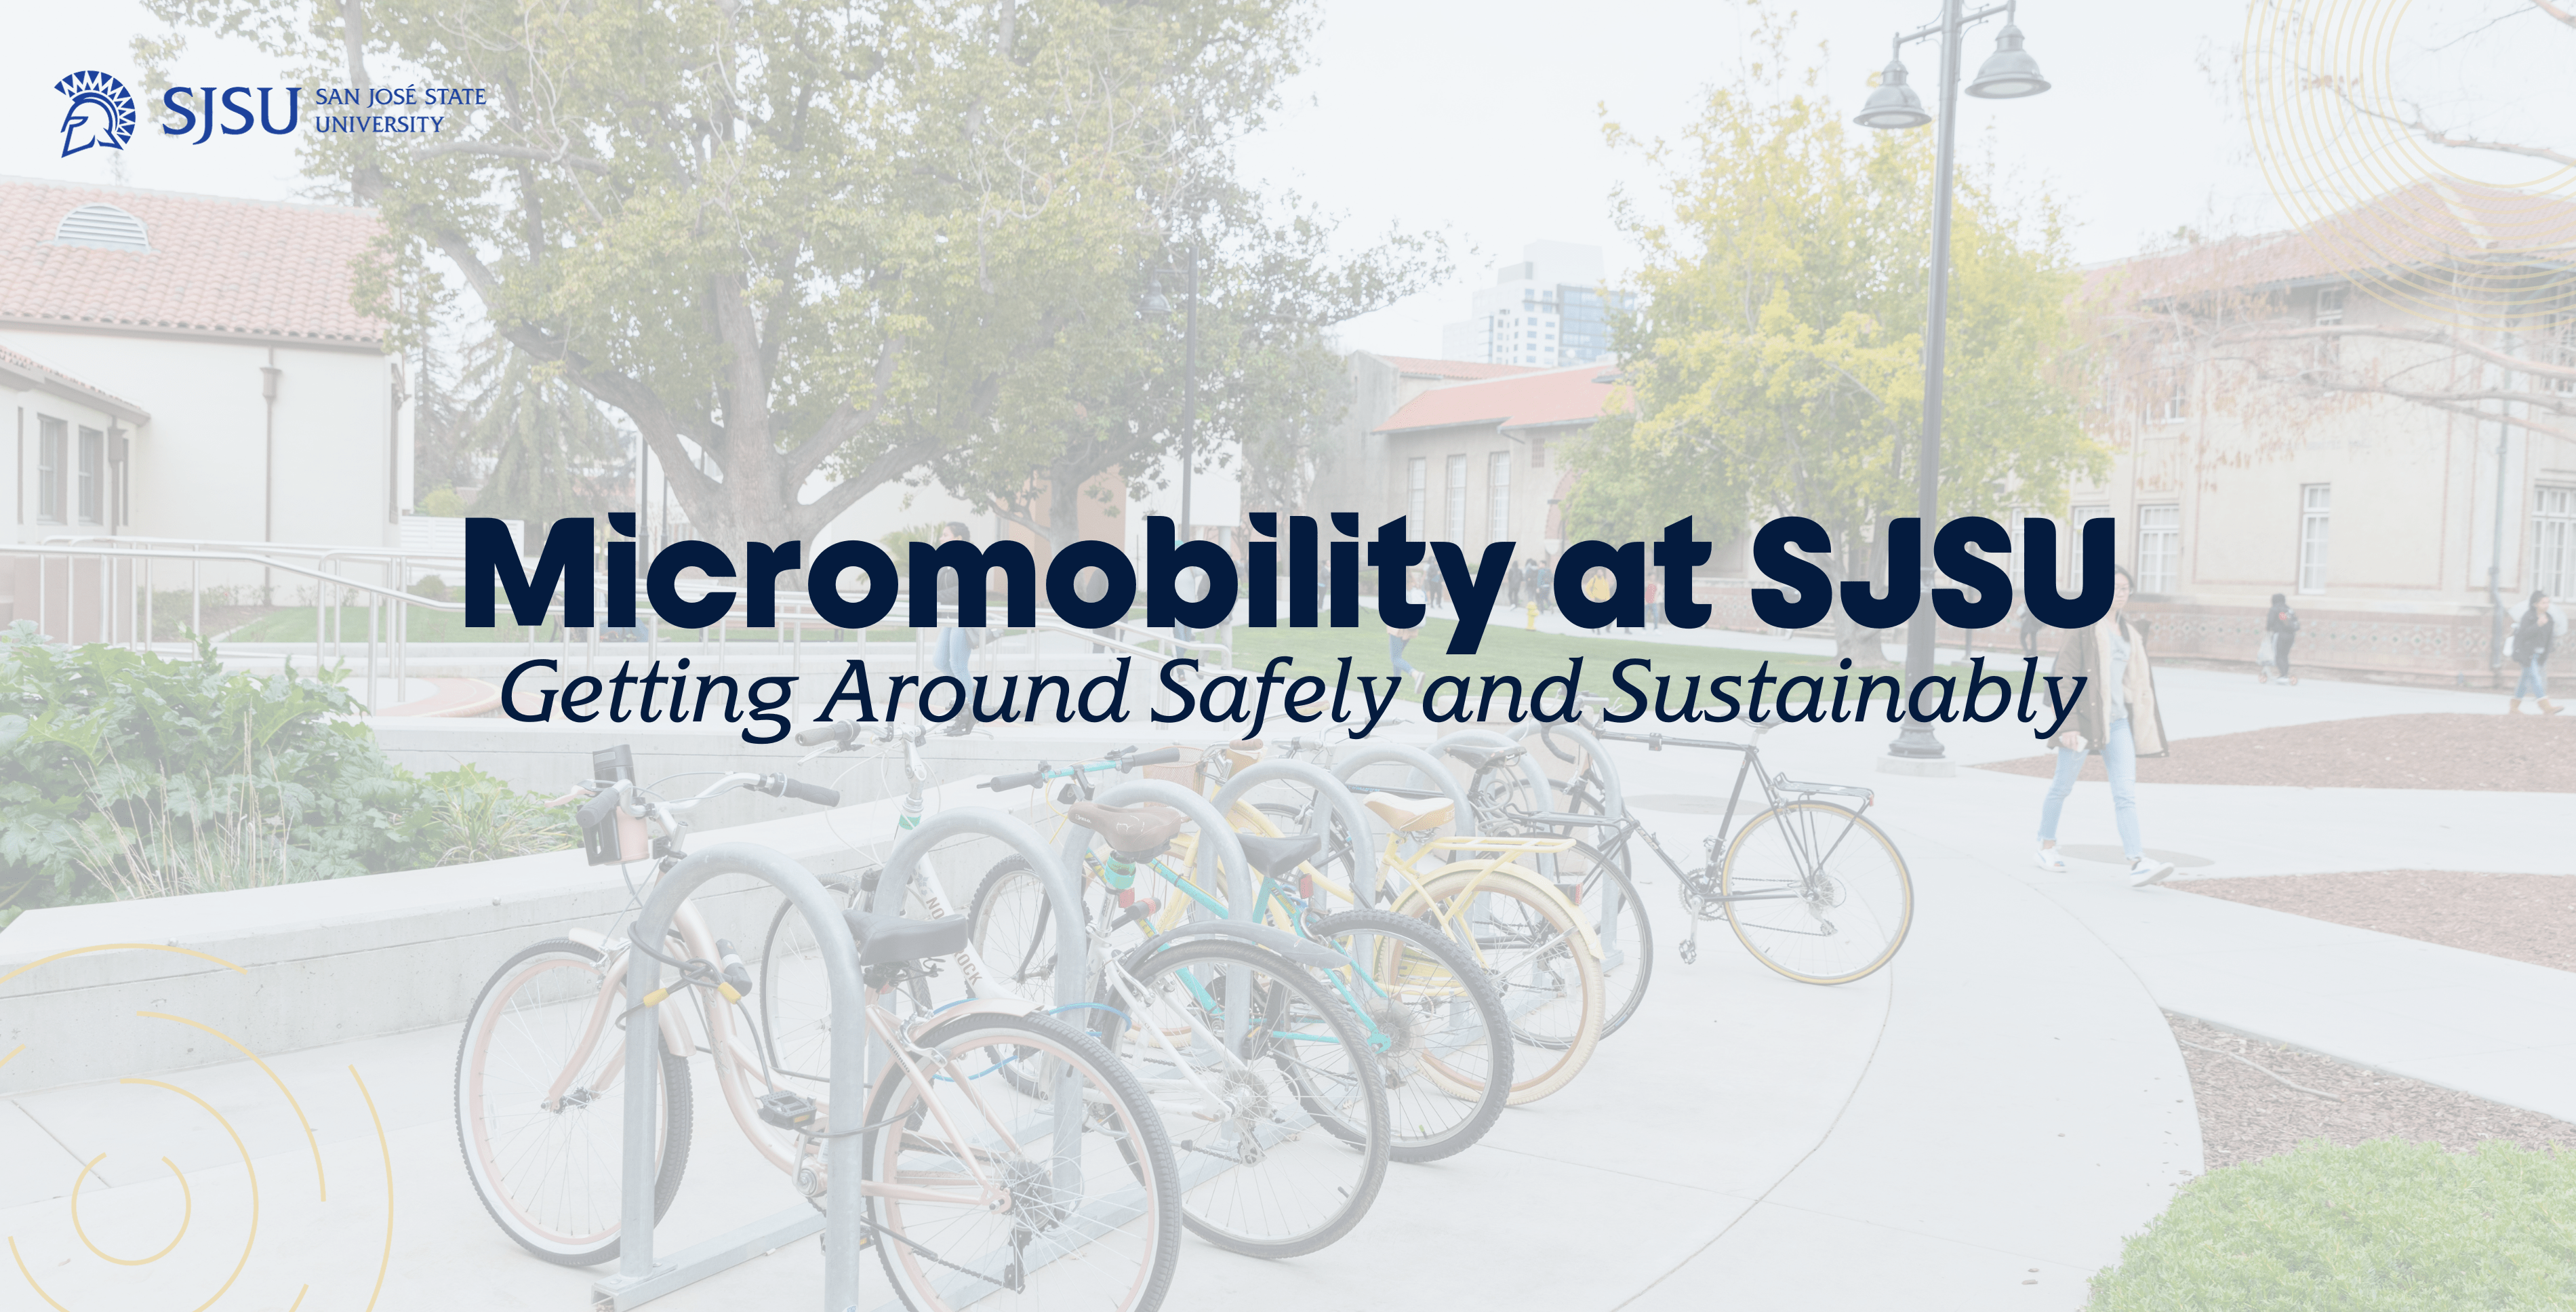 Micromobility: Getting Around Safely and Sustainably at SJSU